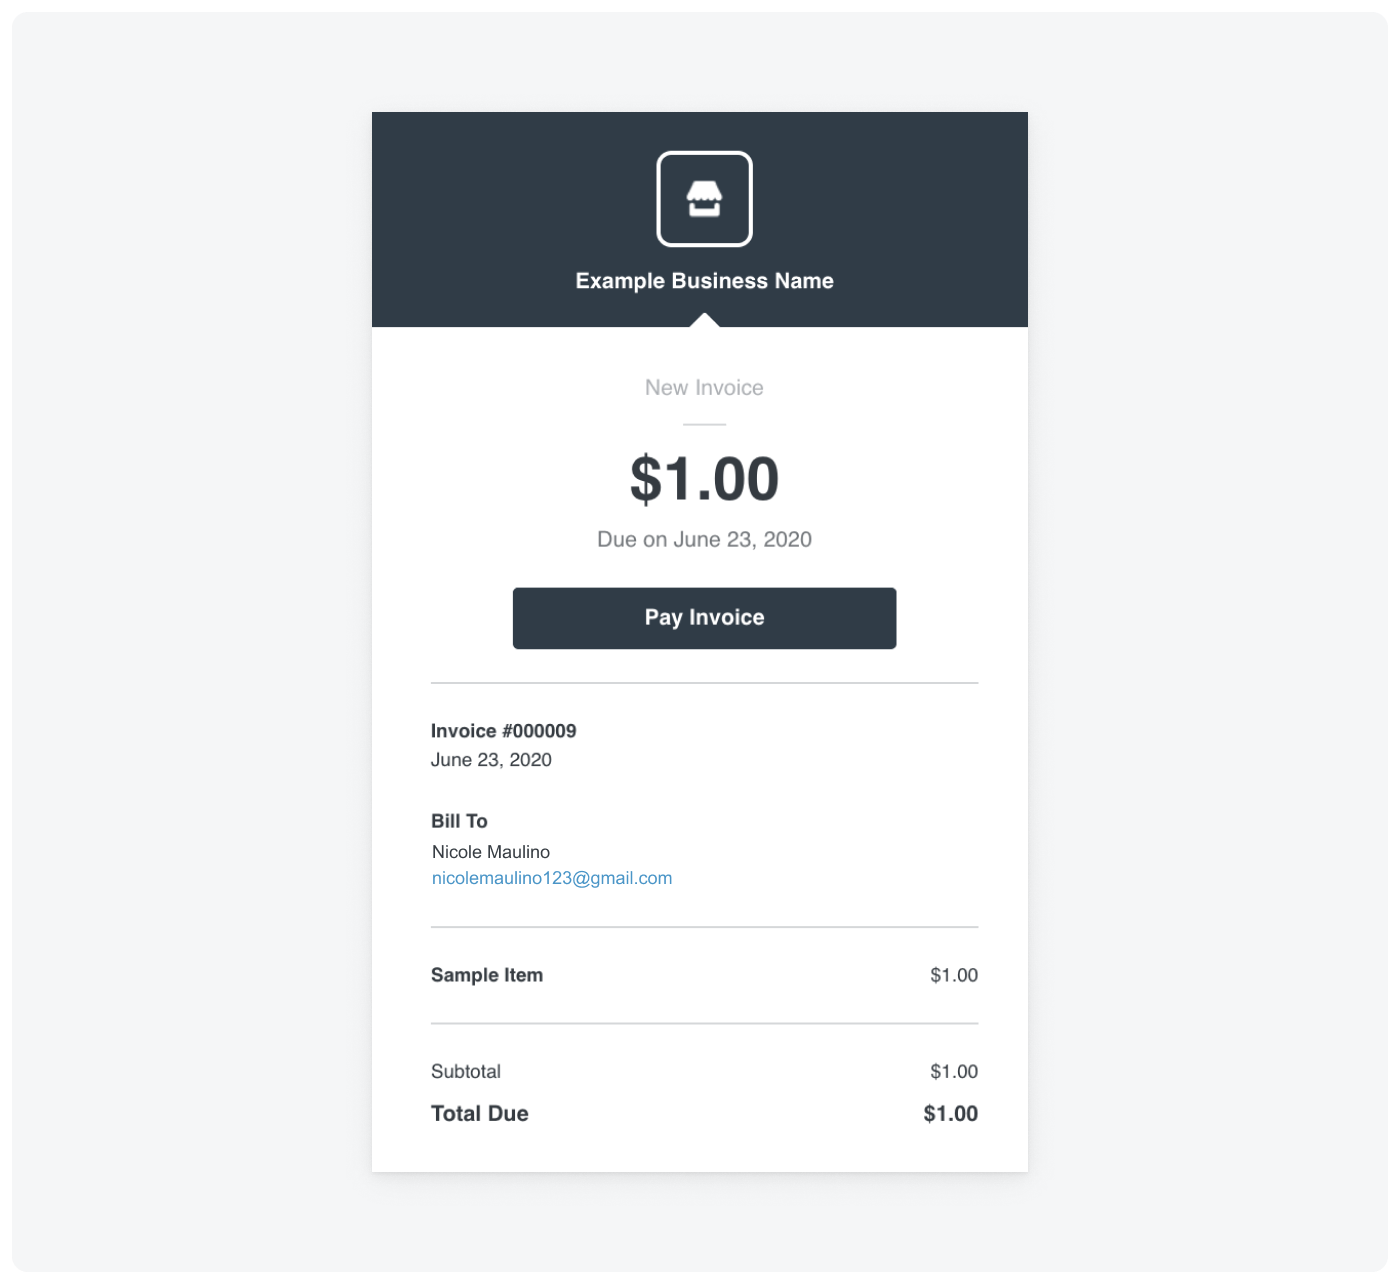 An example invoice that Square emails to customers, which includes a "Pay Invoice" button that opens to the invoice payment page.